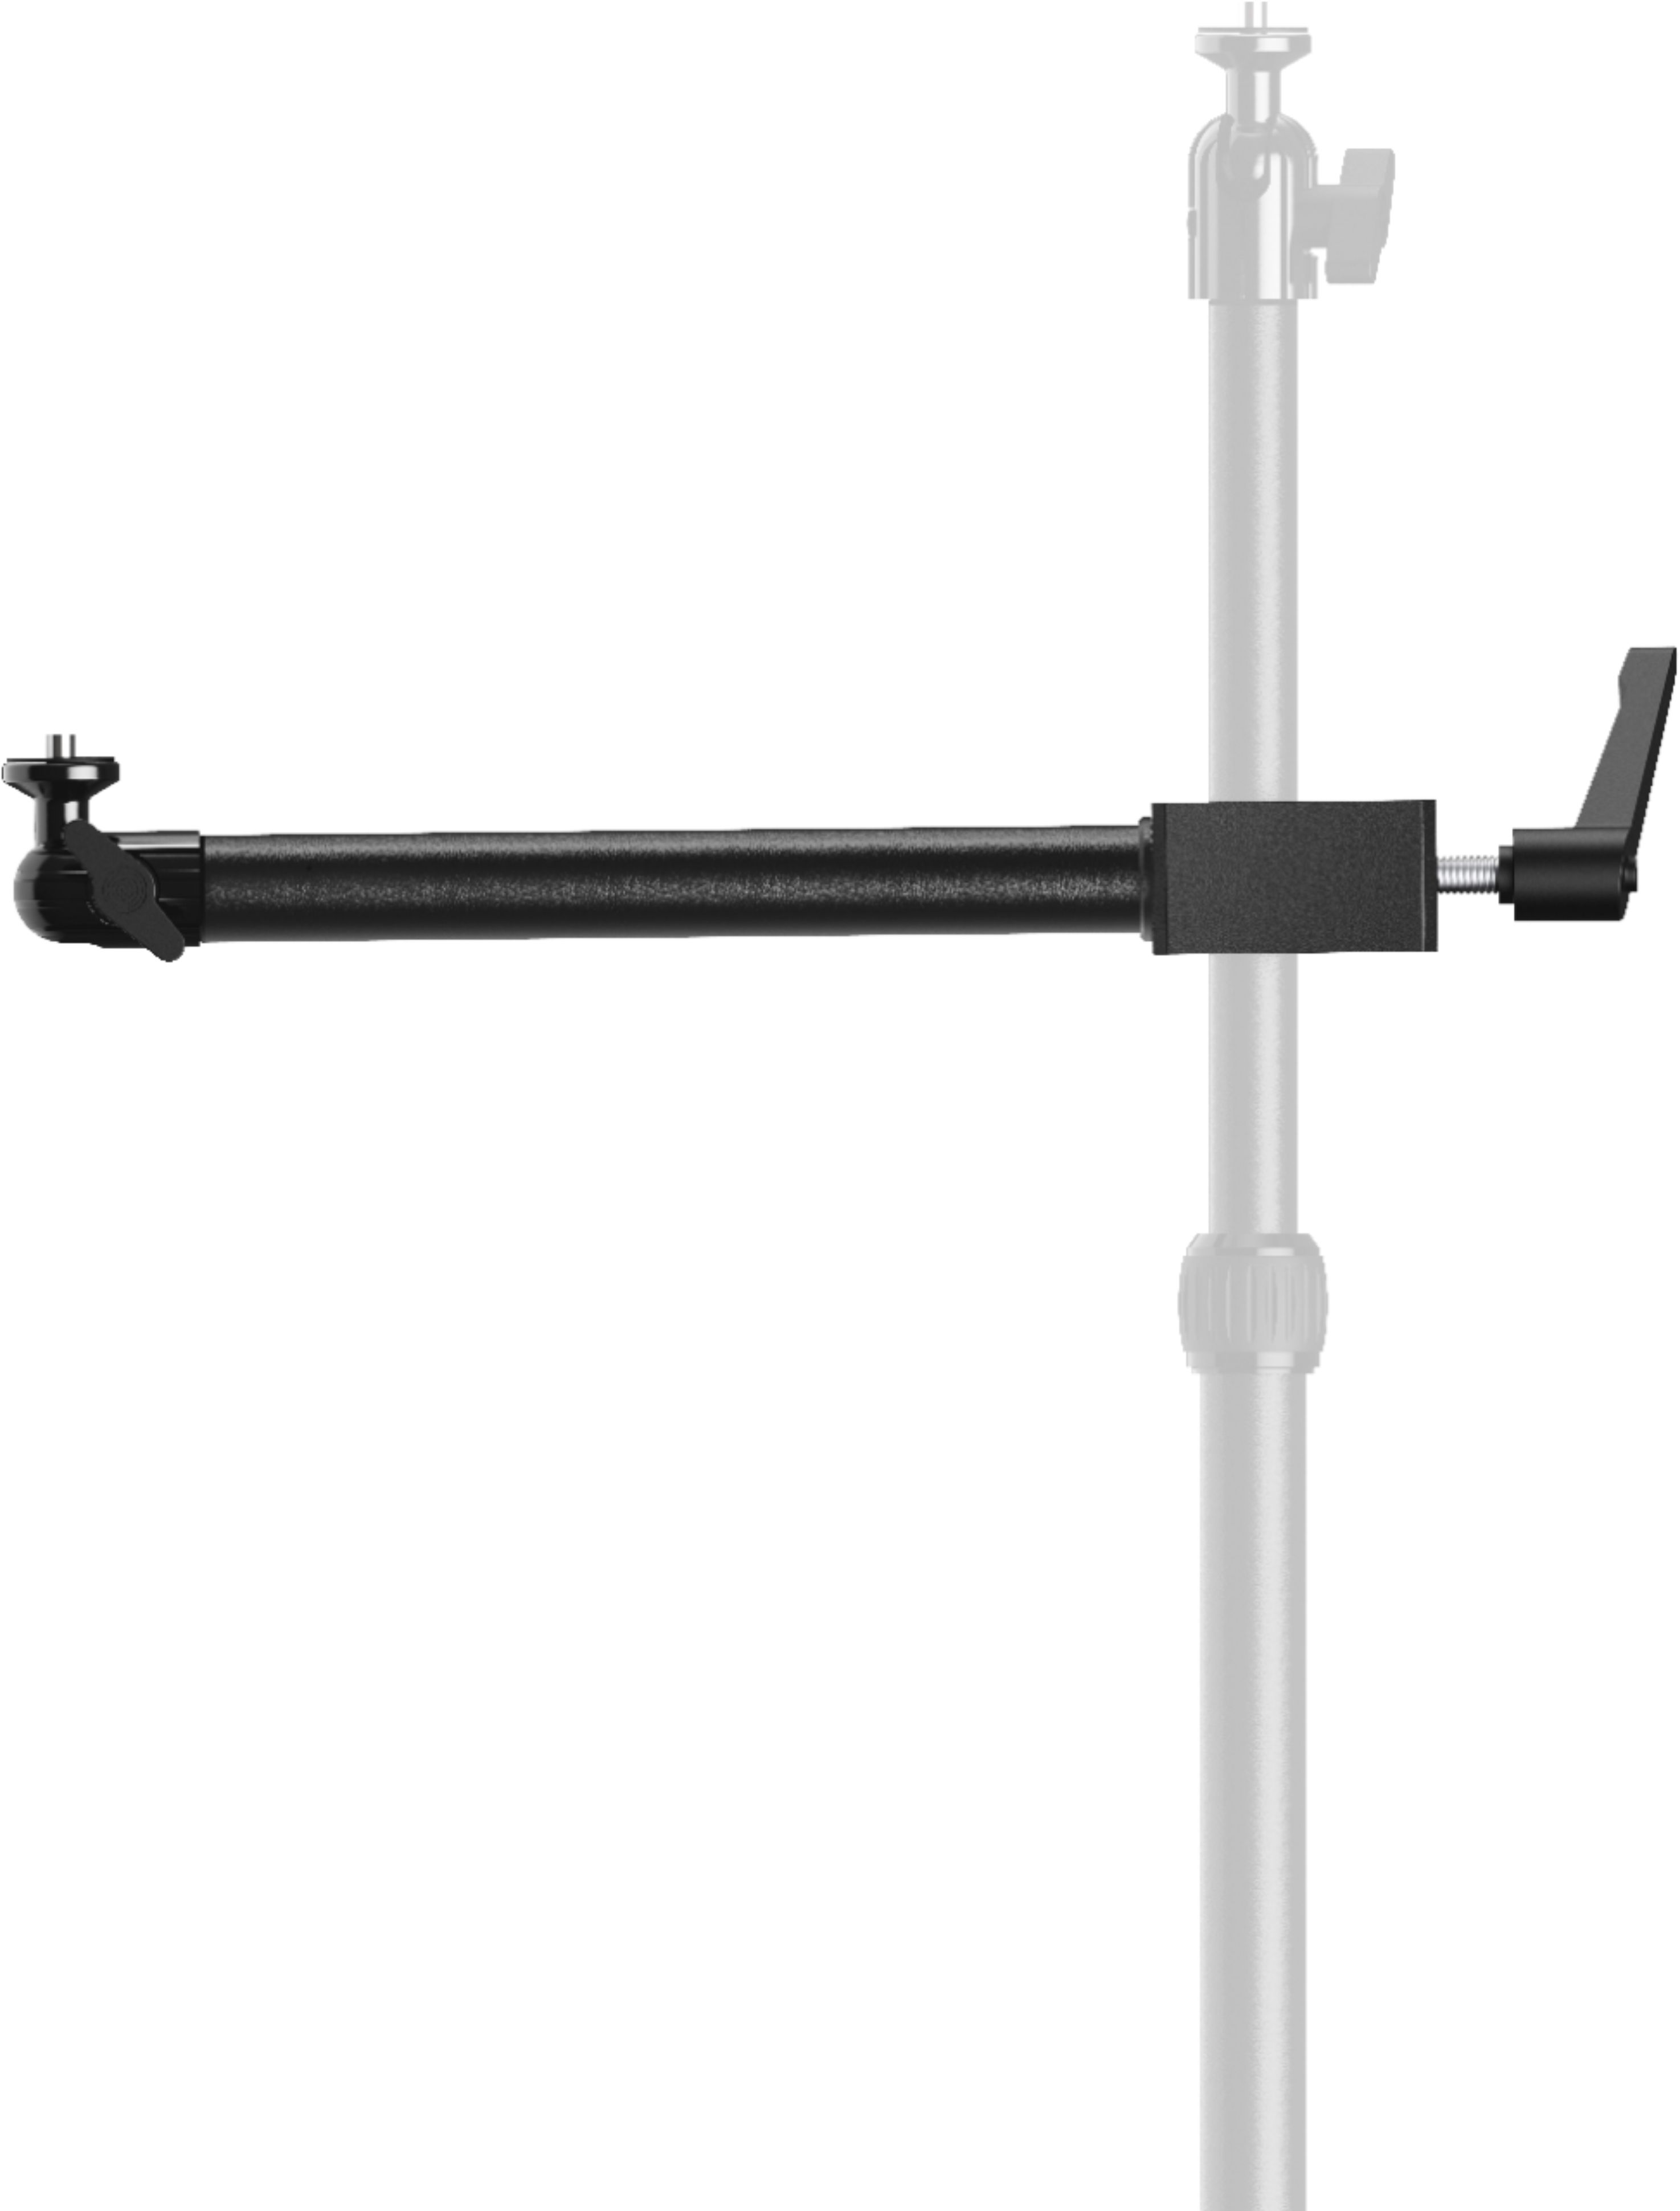 Left View: Elgato - Solid Arm - Attachable Solid Mounting Arm for Cameras, Lights, and Microphones. Works with Master Mount L